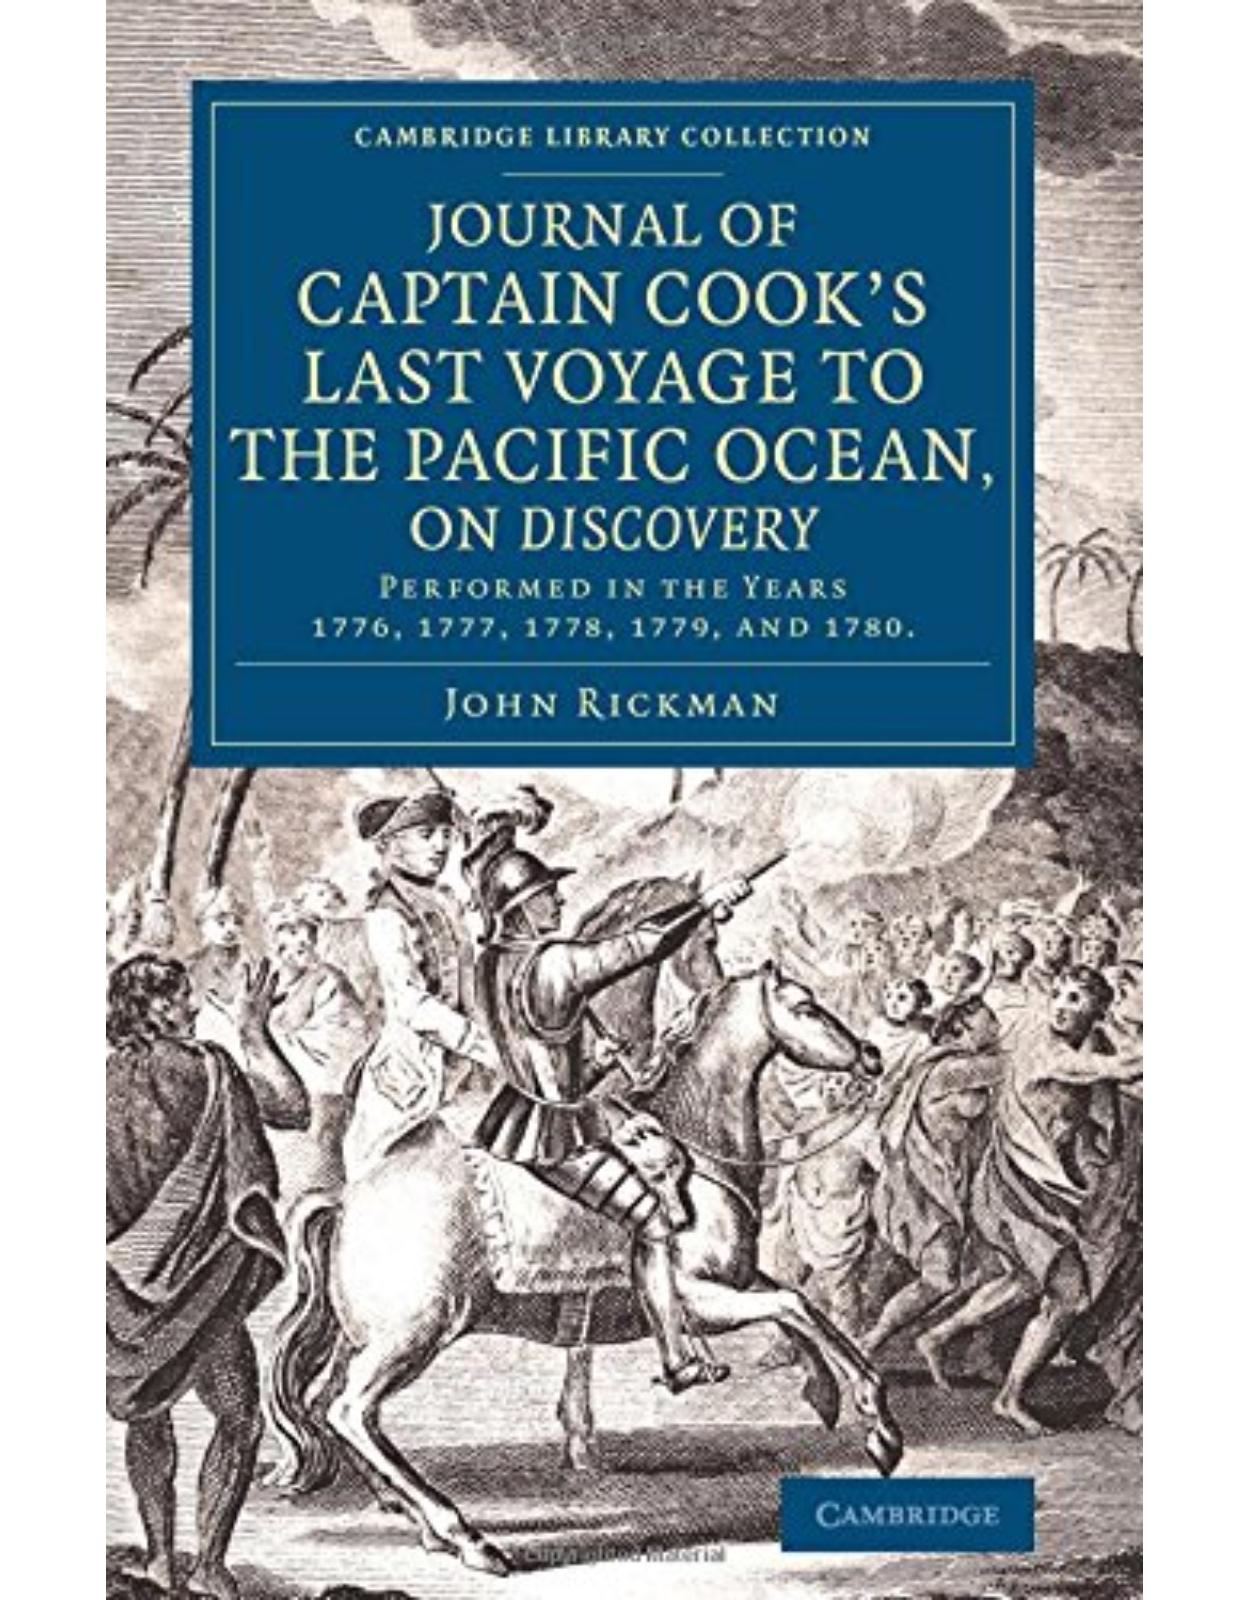 Journal of Captain Cook's Last Voyage to the Pacific Ocean, on Discovery: Performed in the Years 1776, 1777, 1778, 1779, and 1780 (Cambridge Library Collection - Maritime Exploration)